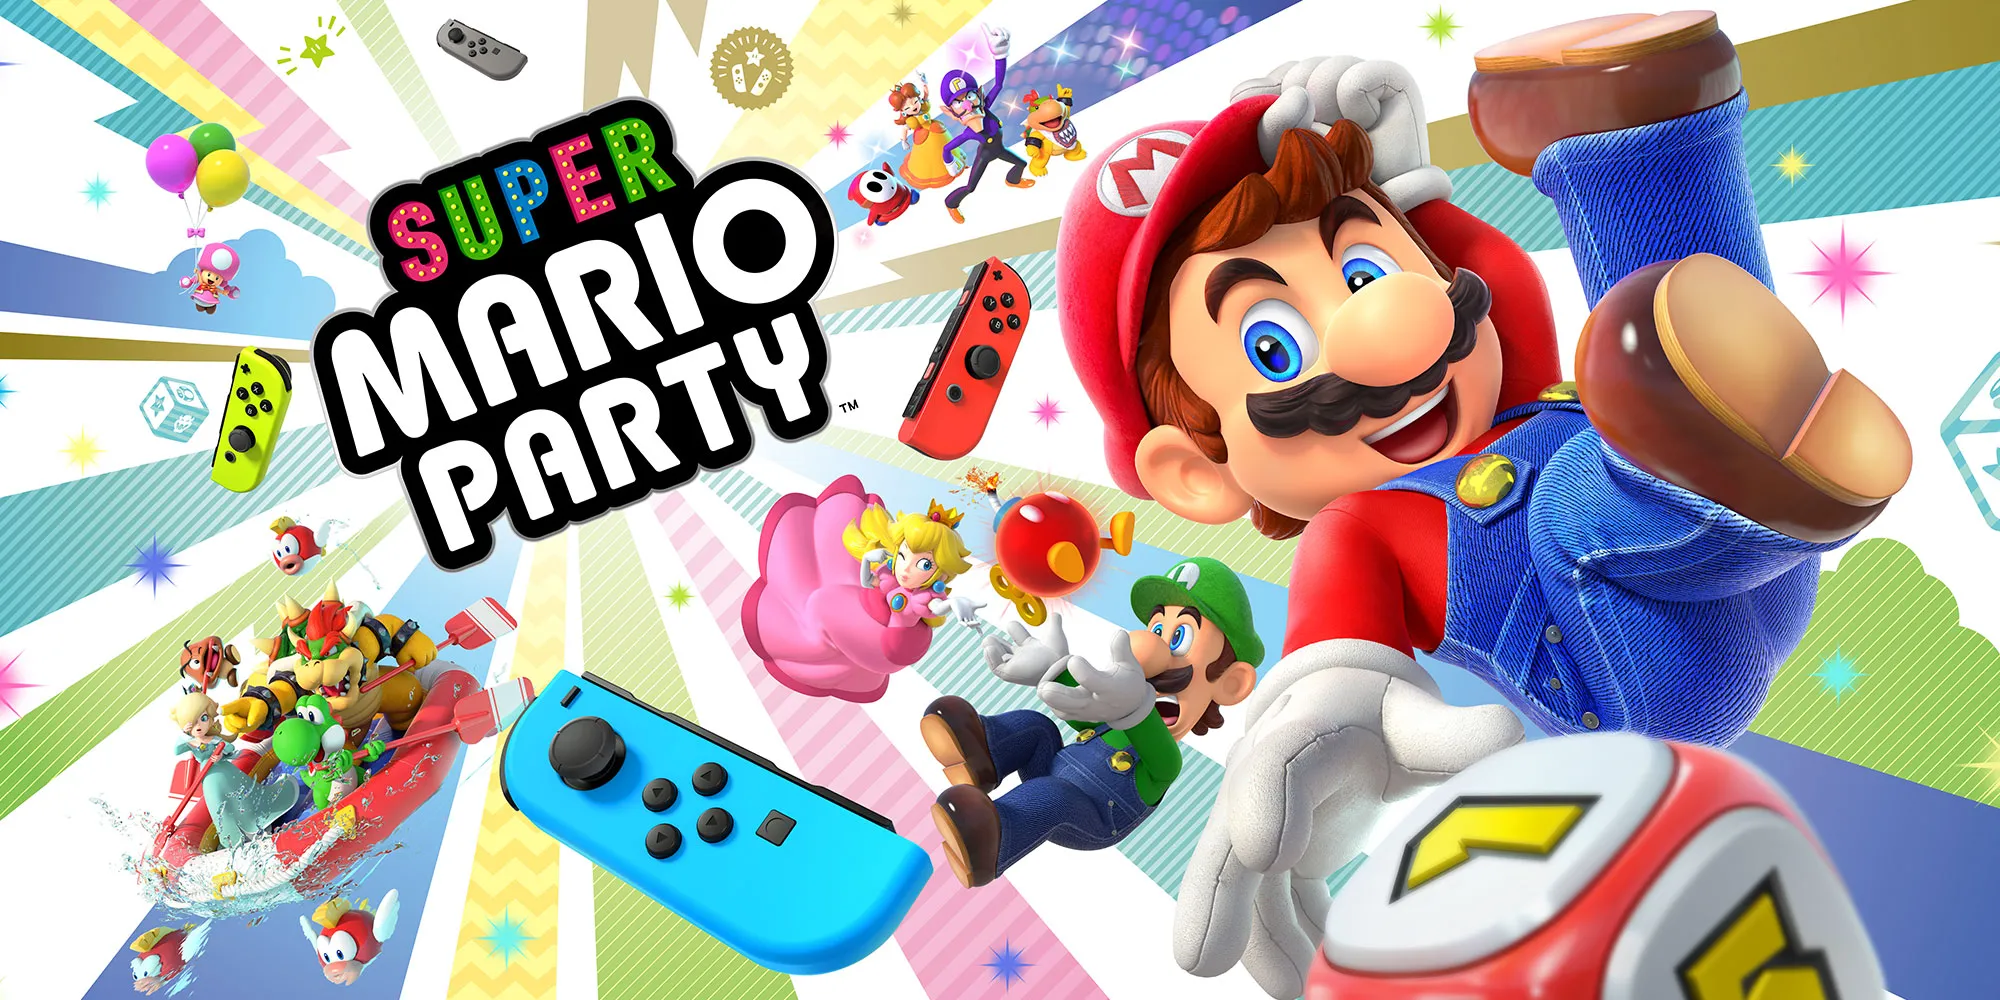 Can I Play Mario Party With Pro Controller?